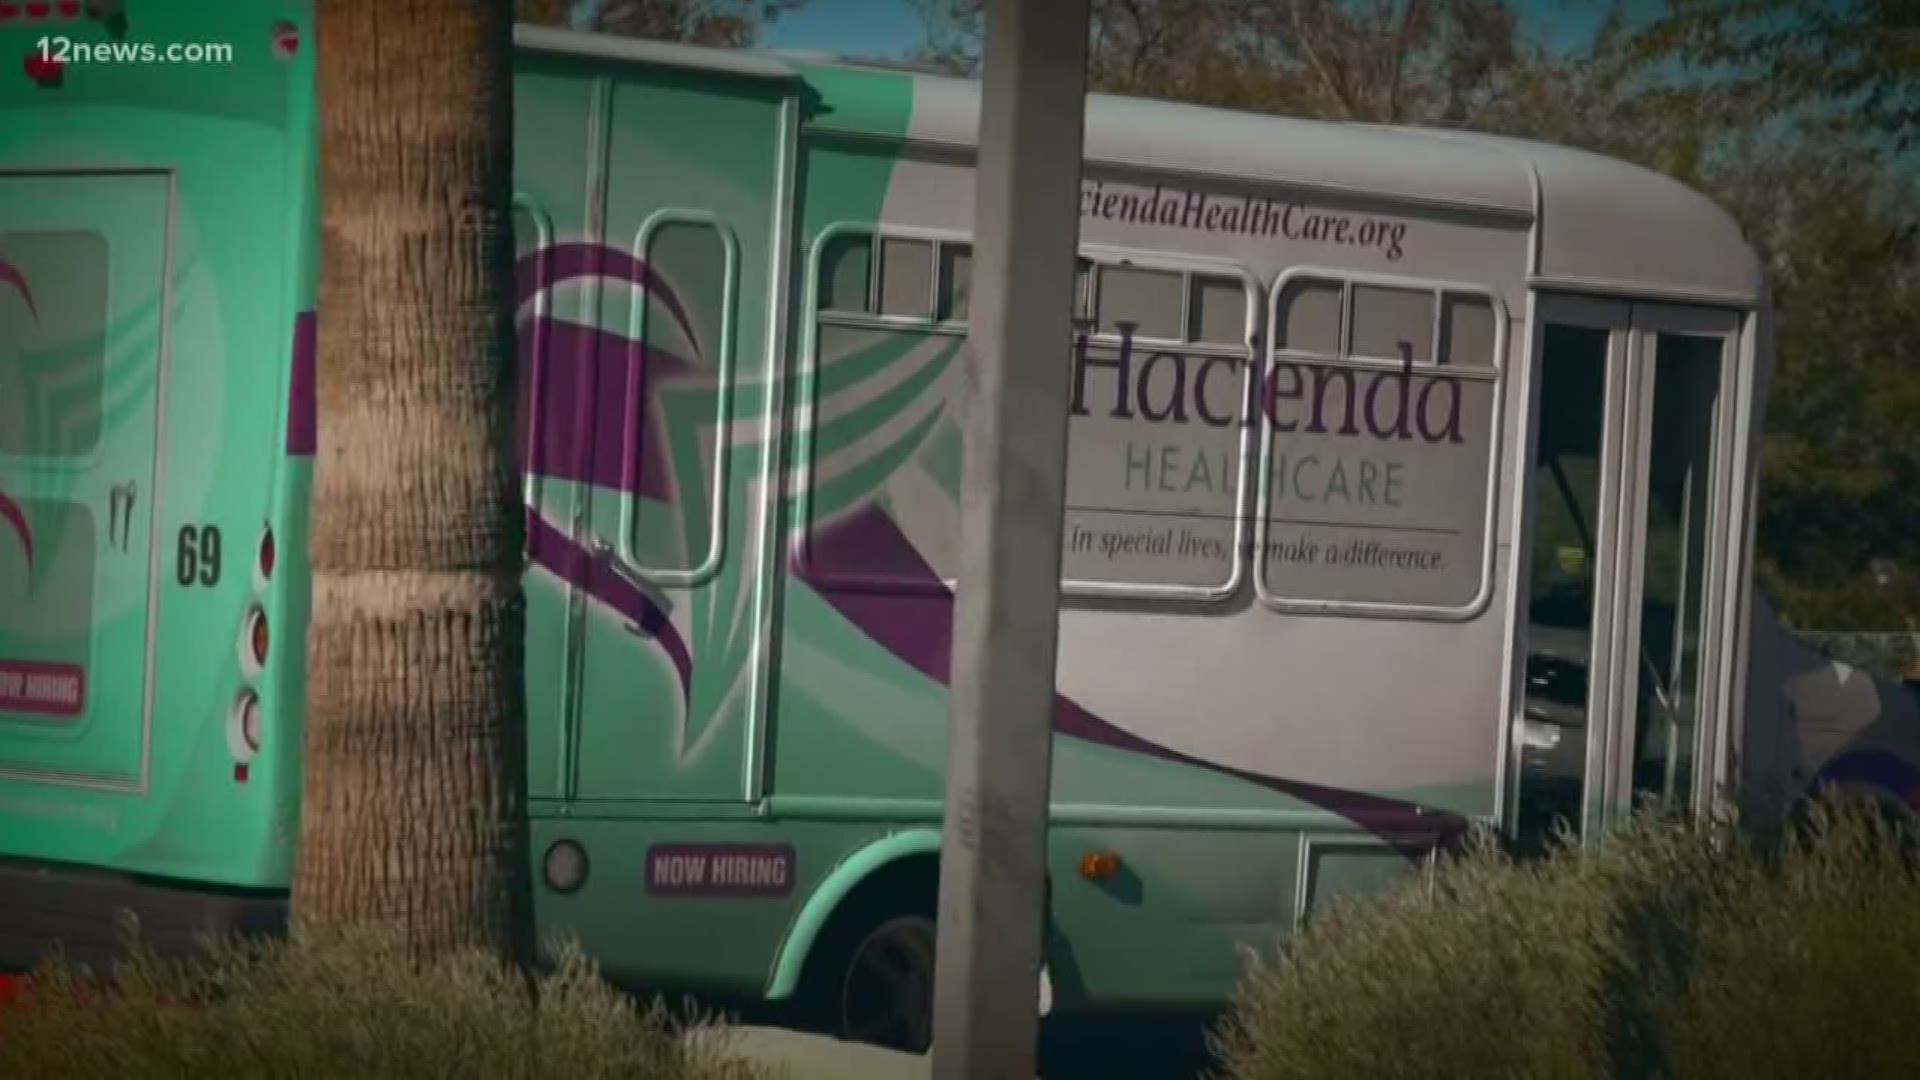 Several members of the board of directors have left, as has the former CEO, but some within Hacienda Healthcare want to see more change after an incapacitated patient was raped and gave birth at the facility.